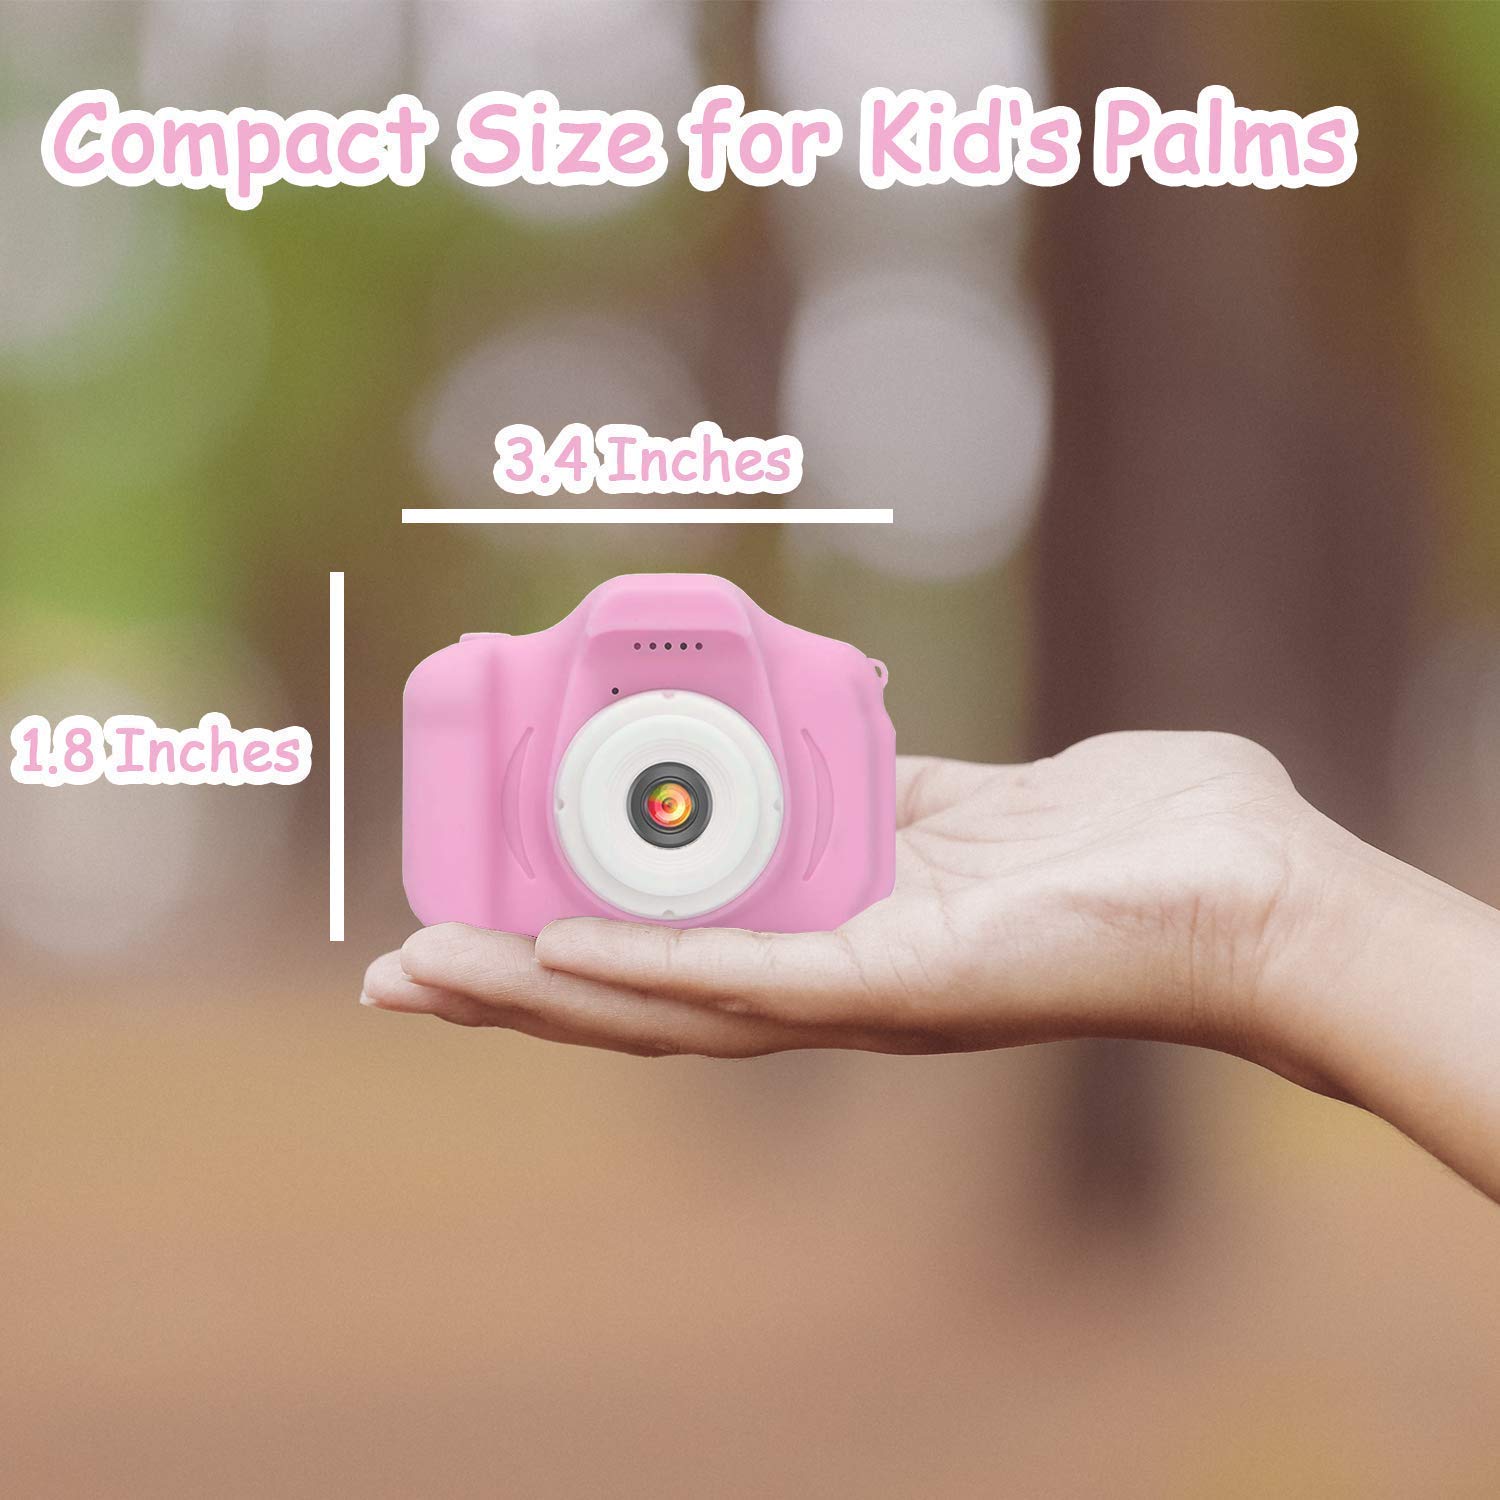 Review of Hachi's Choice Gift Kids Camera Toys for 3-9 Year Old Girls